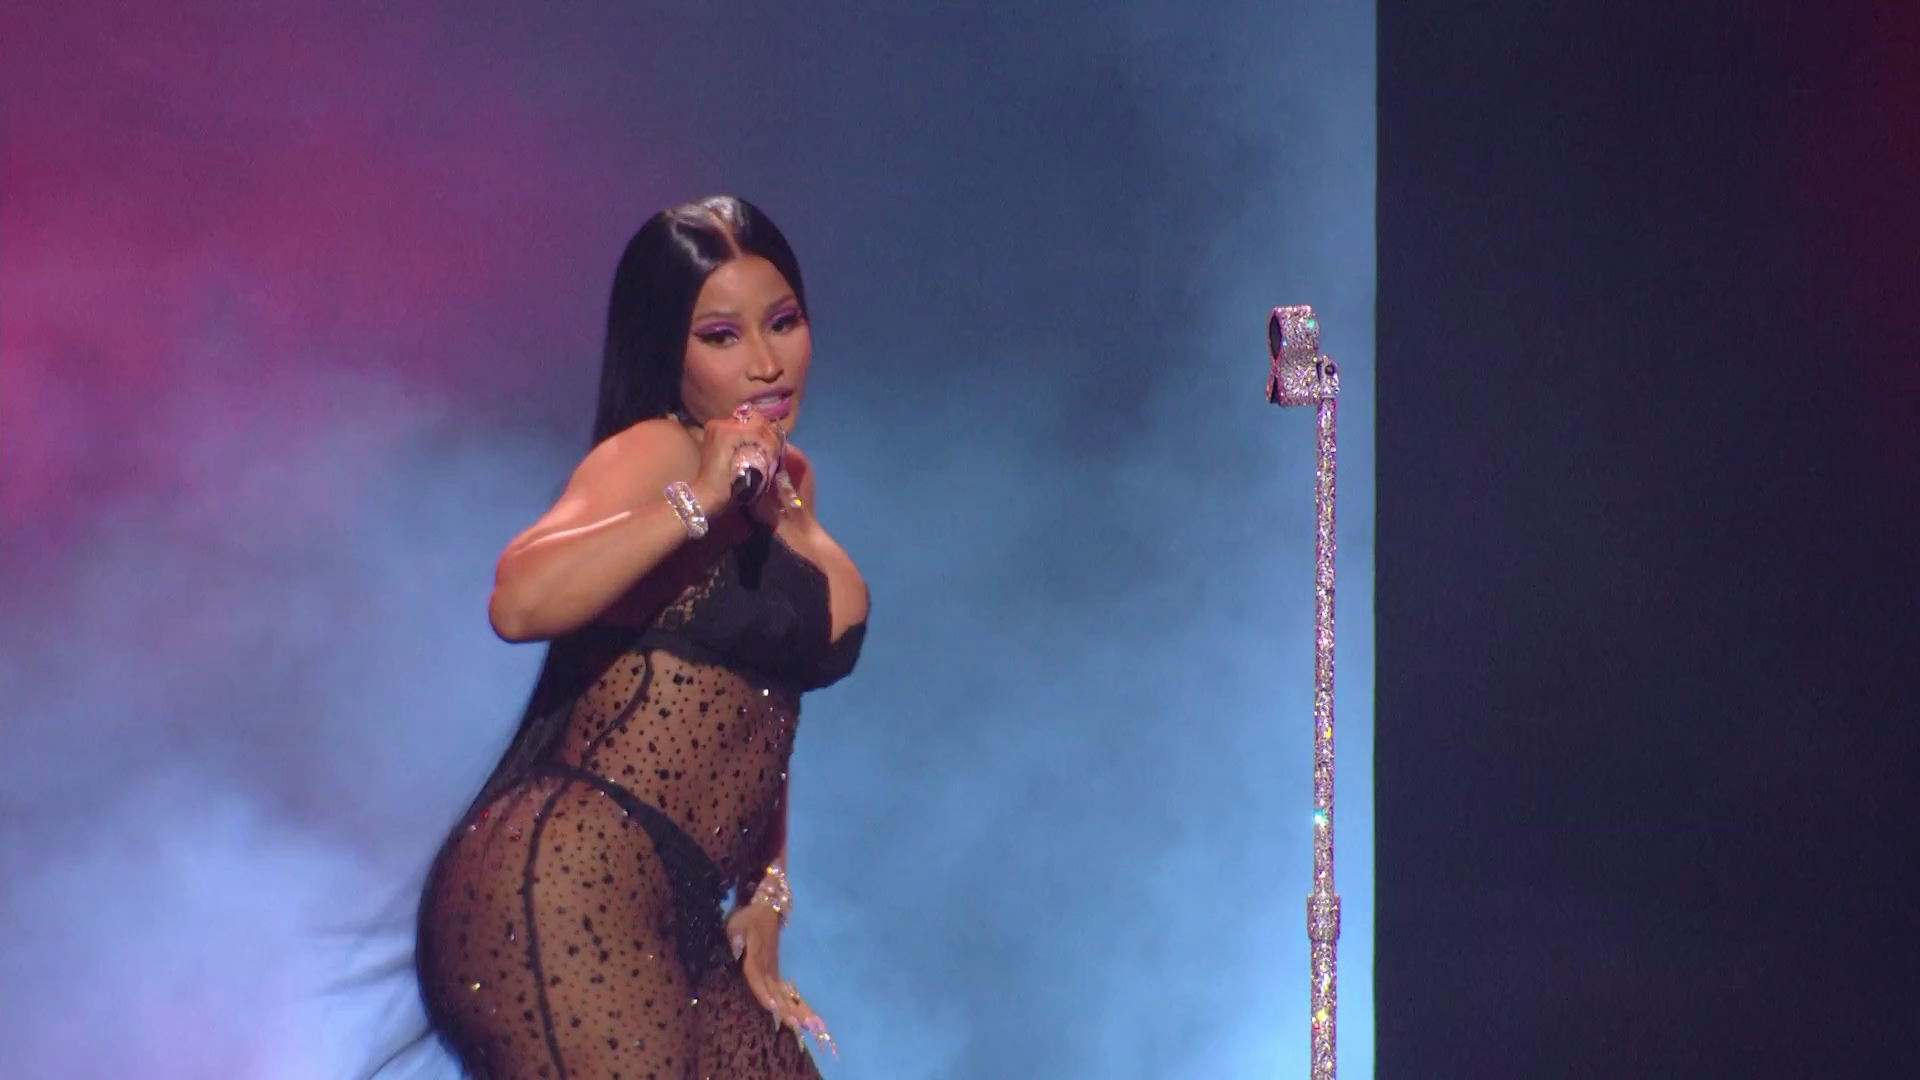 Nicki Minaj performs her new track "Last Time I Saw You" and debuts "Big Difference" at the MTV VMAs 2023.